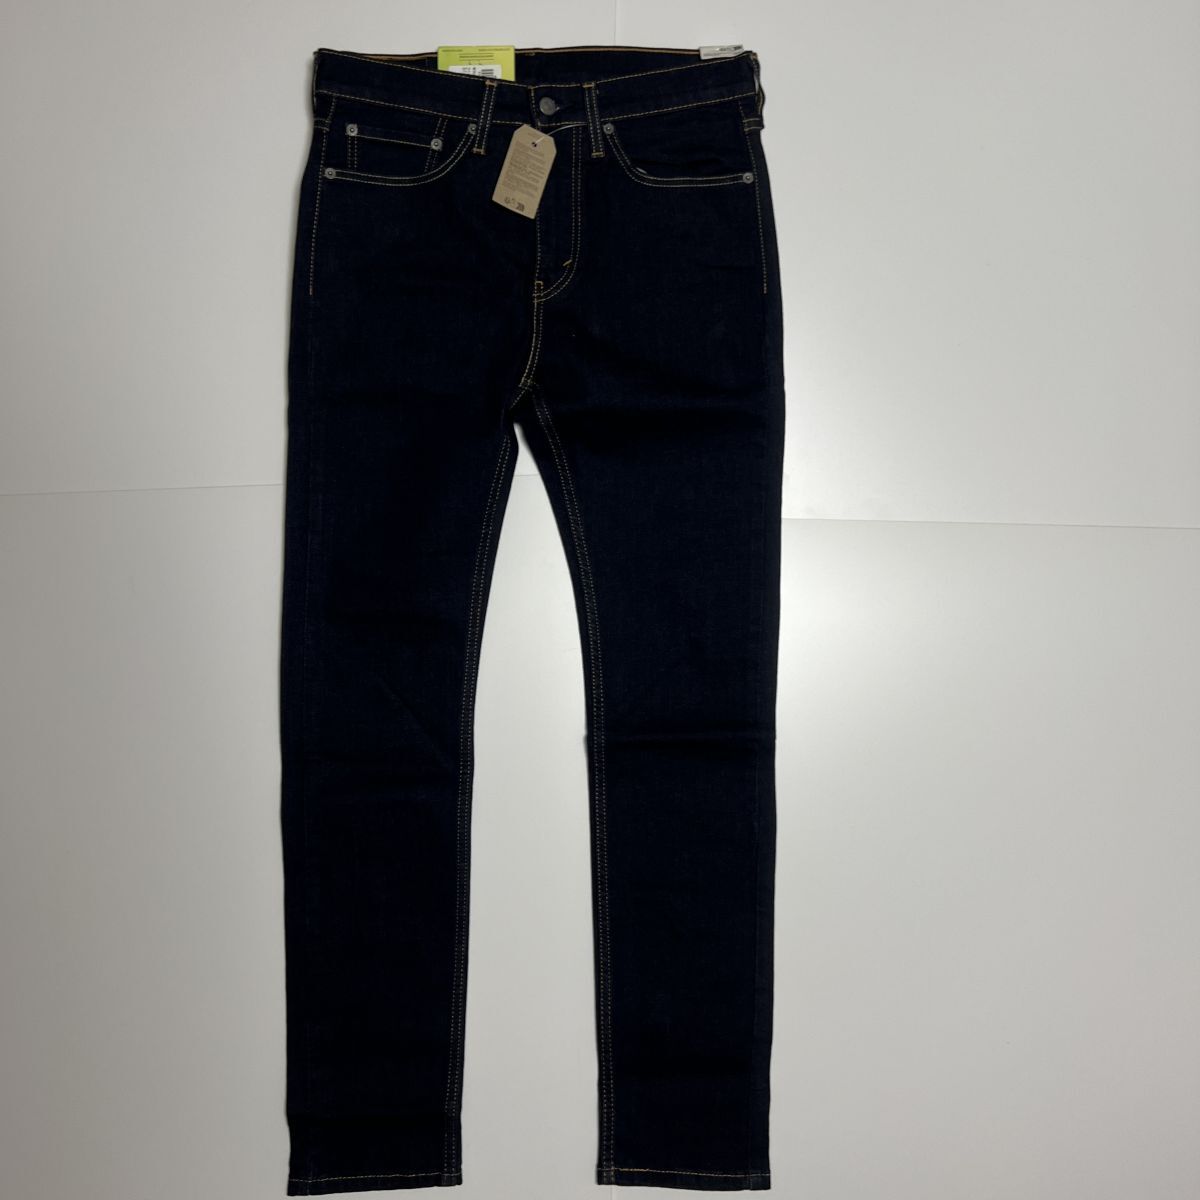 * Levi's Levis 510 new goods men's comfortable stretch casual skinny jeans Denim 34 -inch [05510-0692-34] four .*QWER*